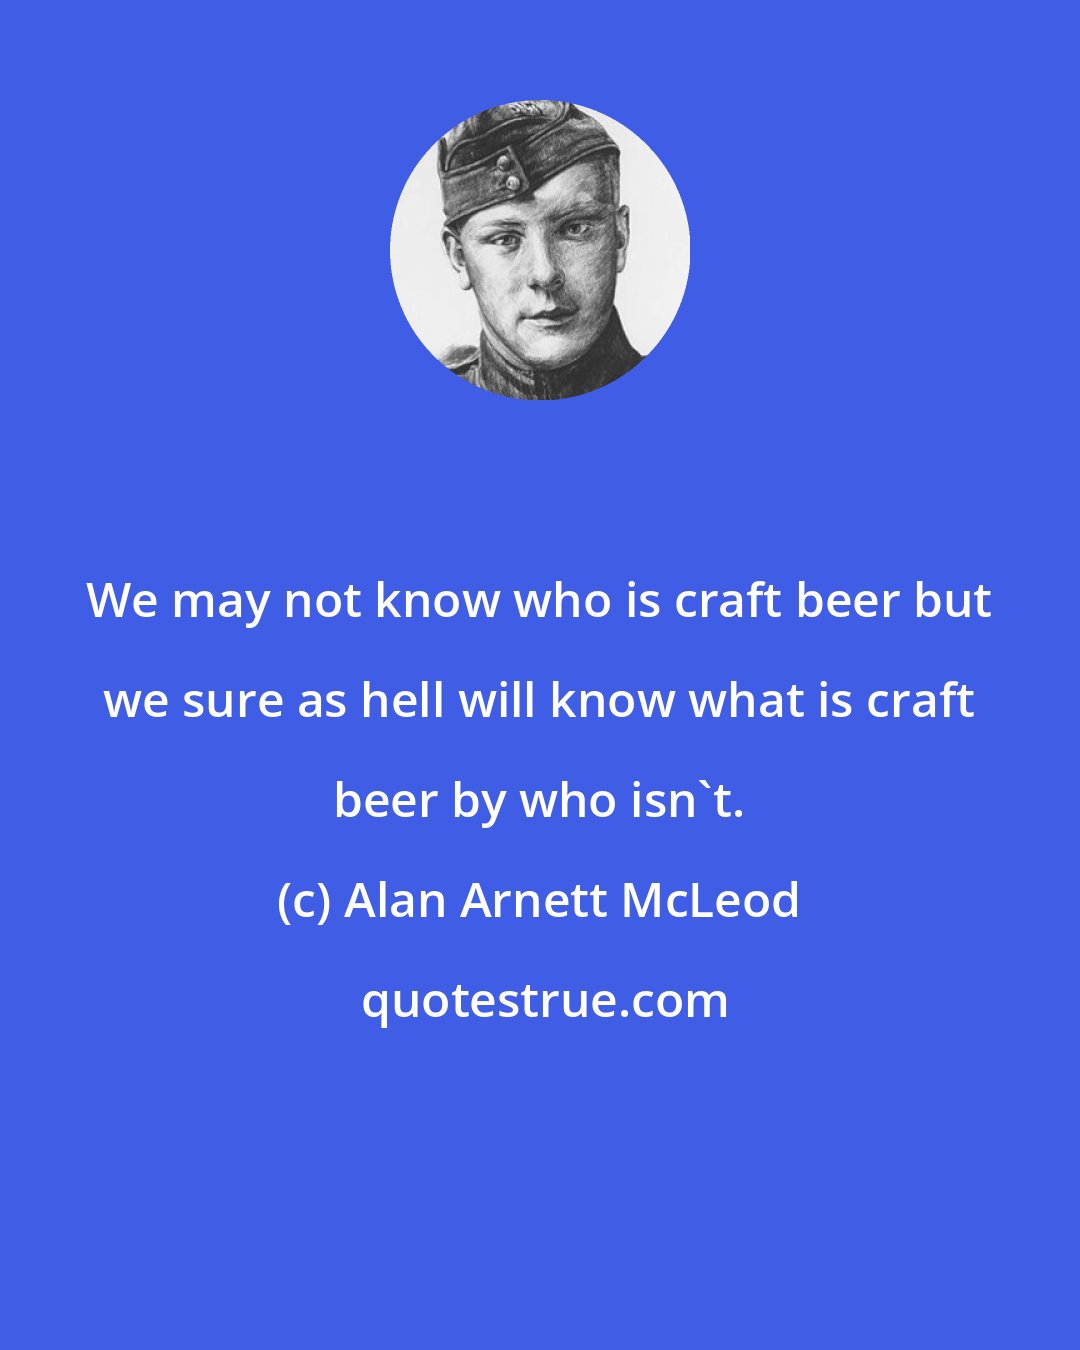 Alan Arnett McLeod: We may not know who is craft beer but we sure as hell will know what is craft beer by who isn't.